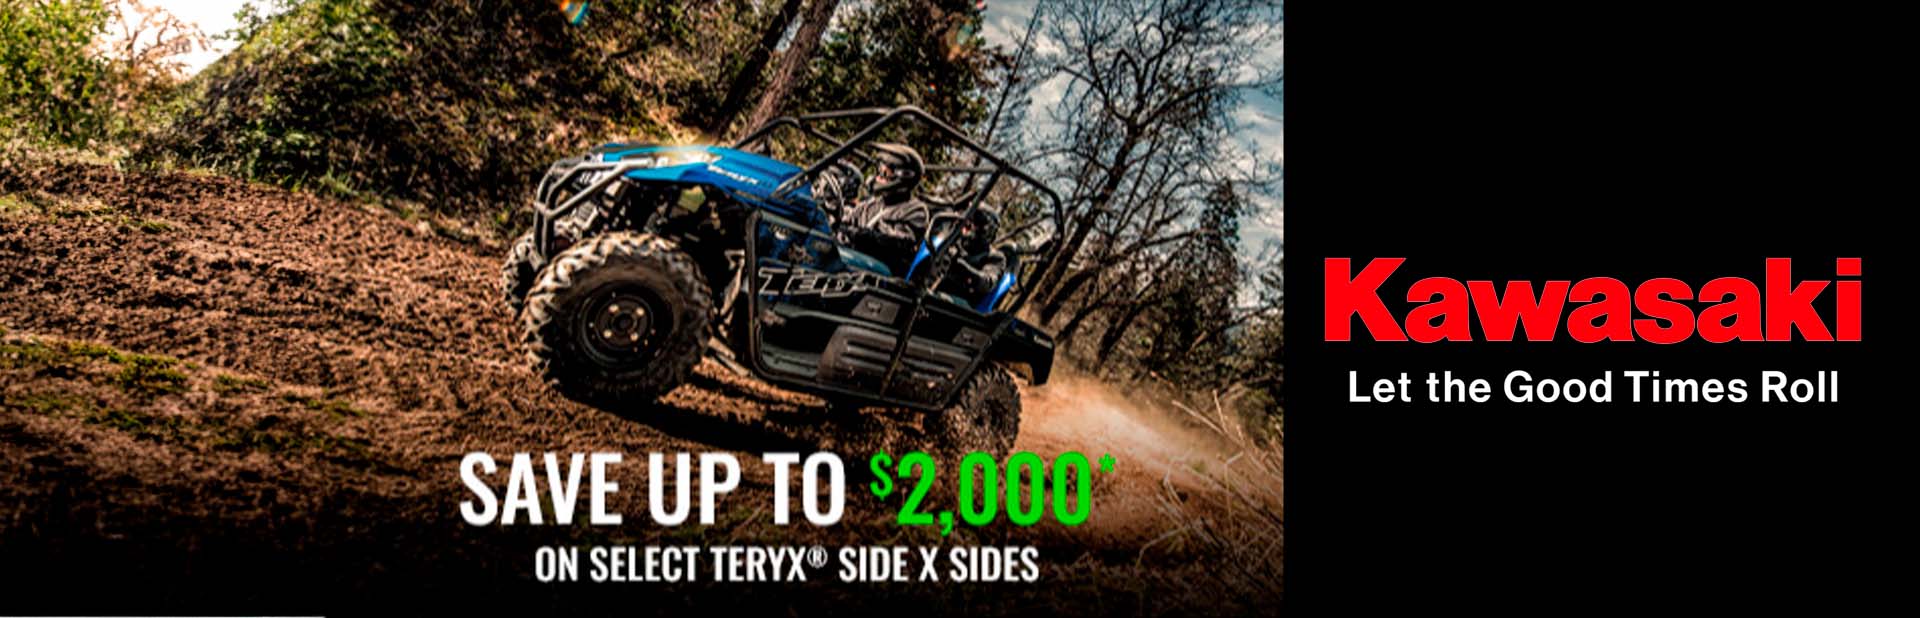 Save Up To $2,000* On Select Teryx® Side X Sides